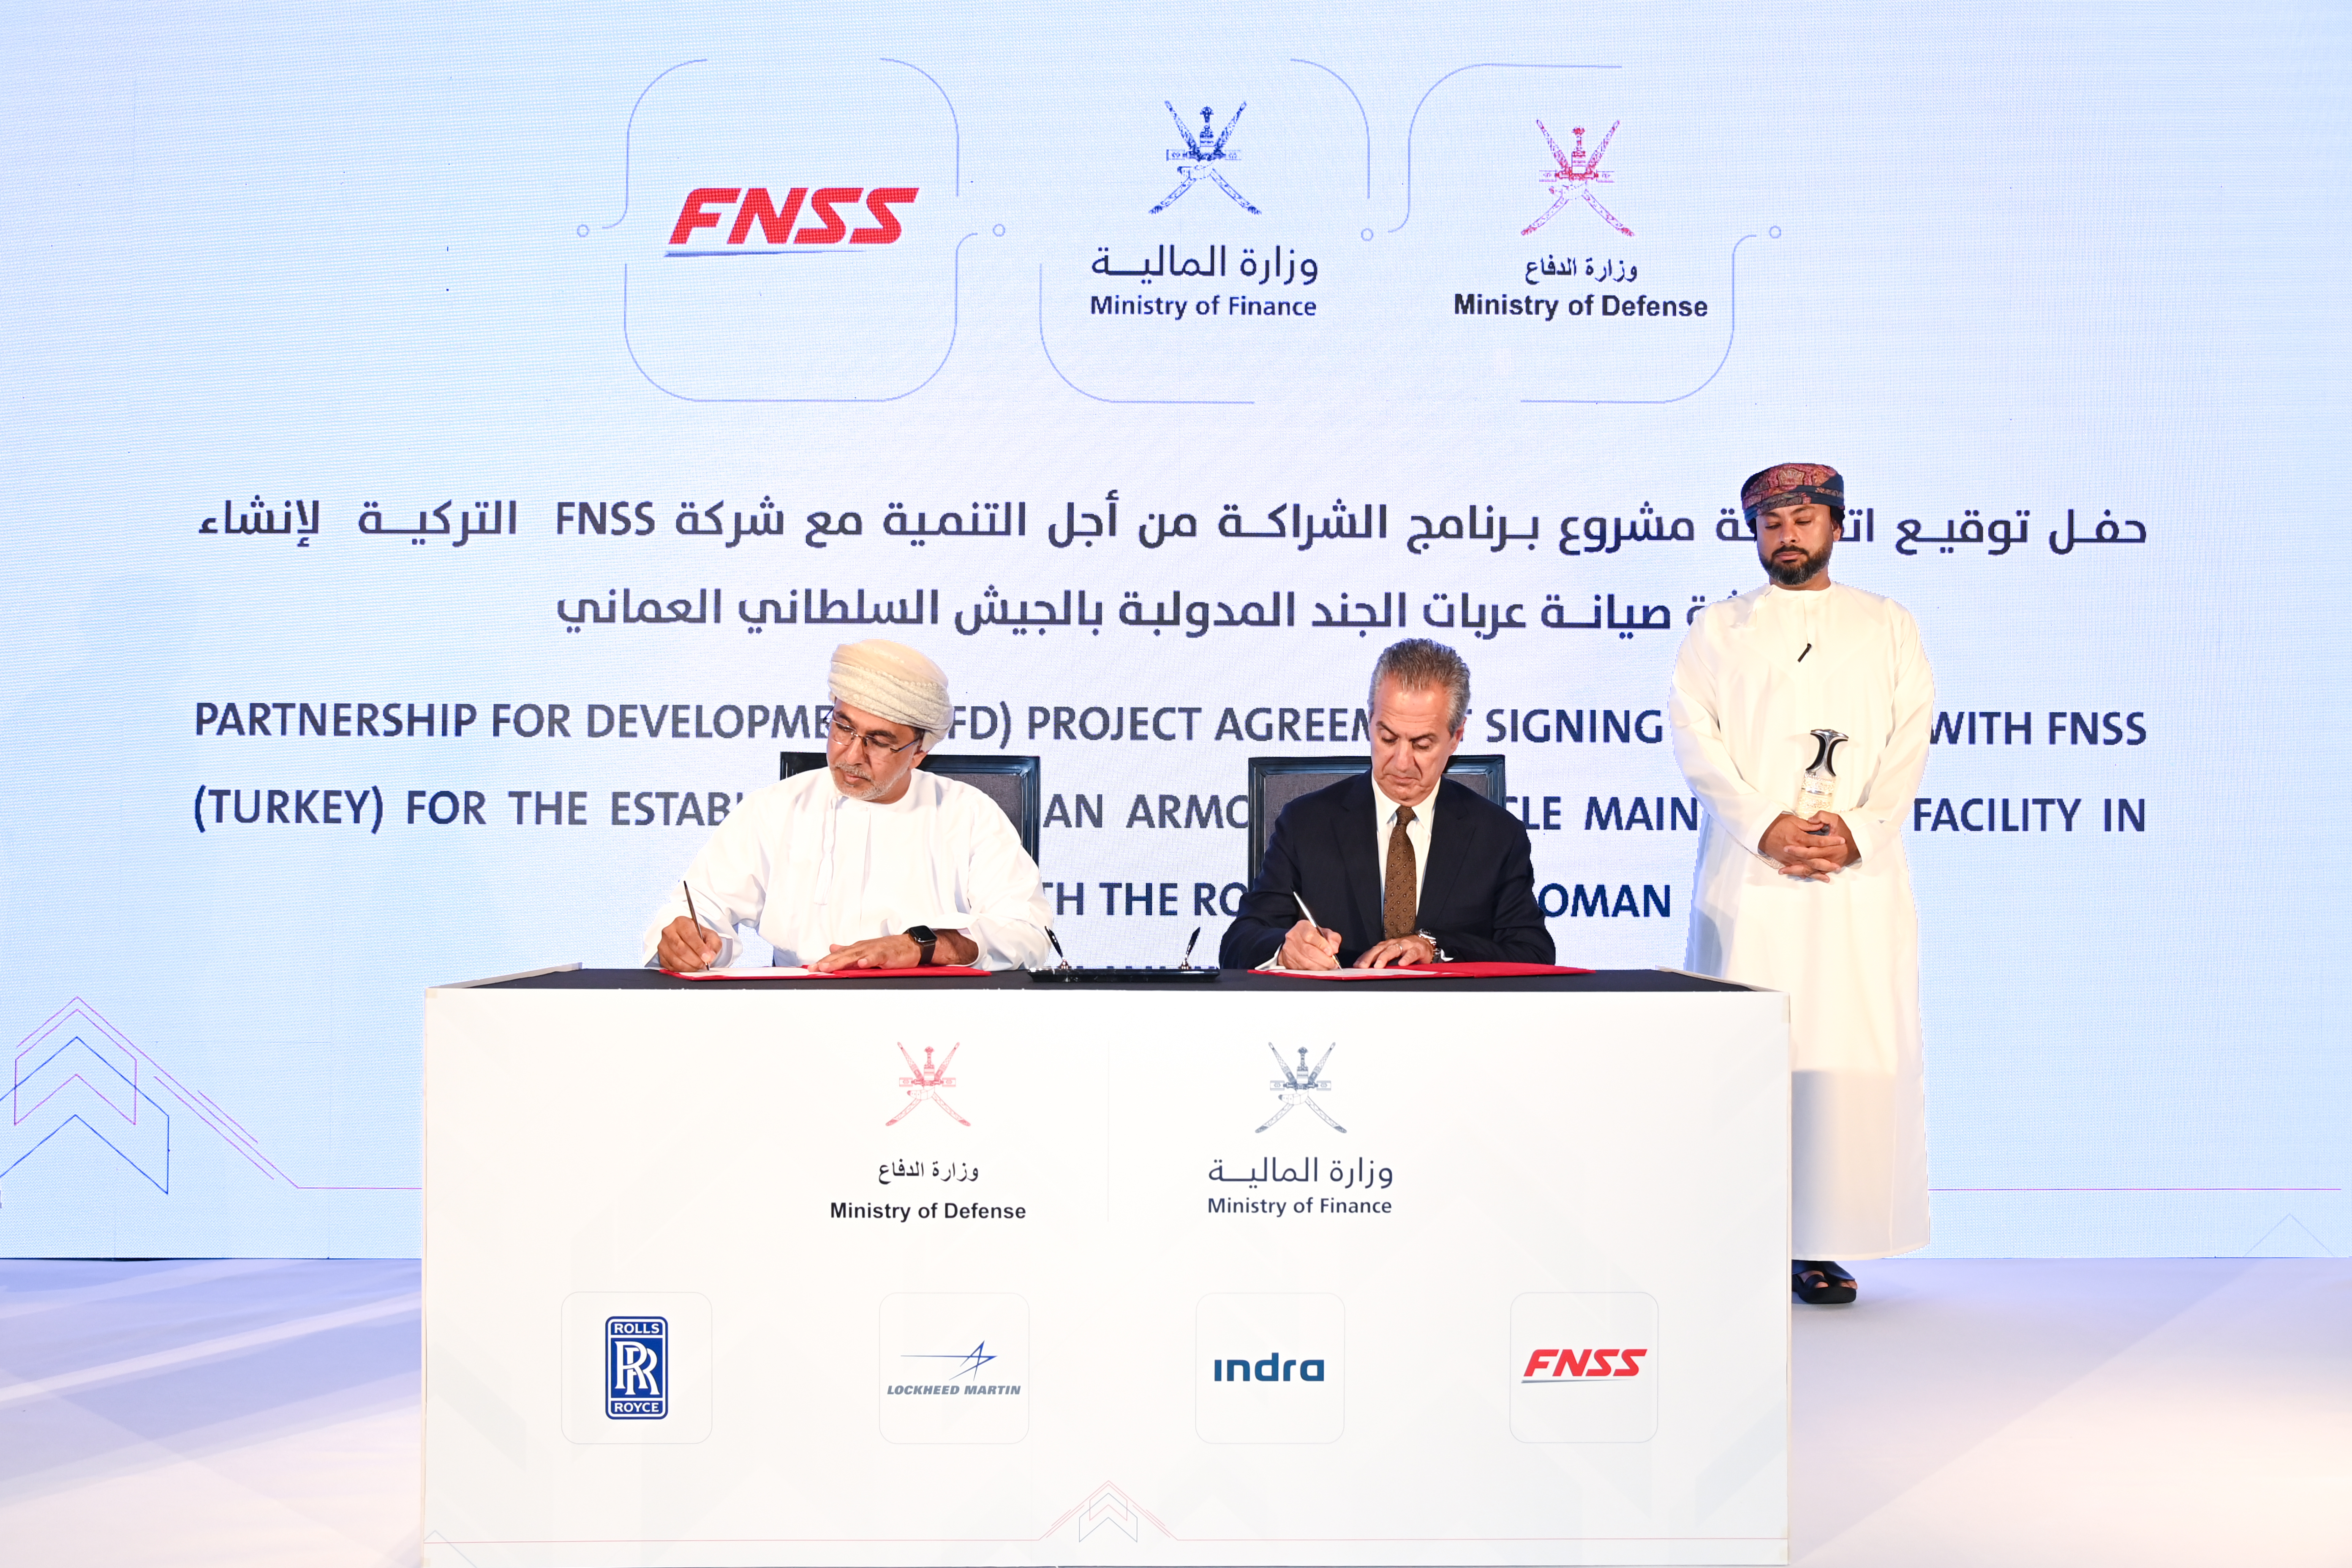 The Contract Has Been Signed for the ``Depot Level Maintenance and Repair Facility`` Project to be Implemented by FNSS in Oman